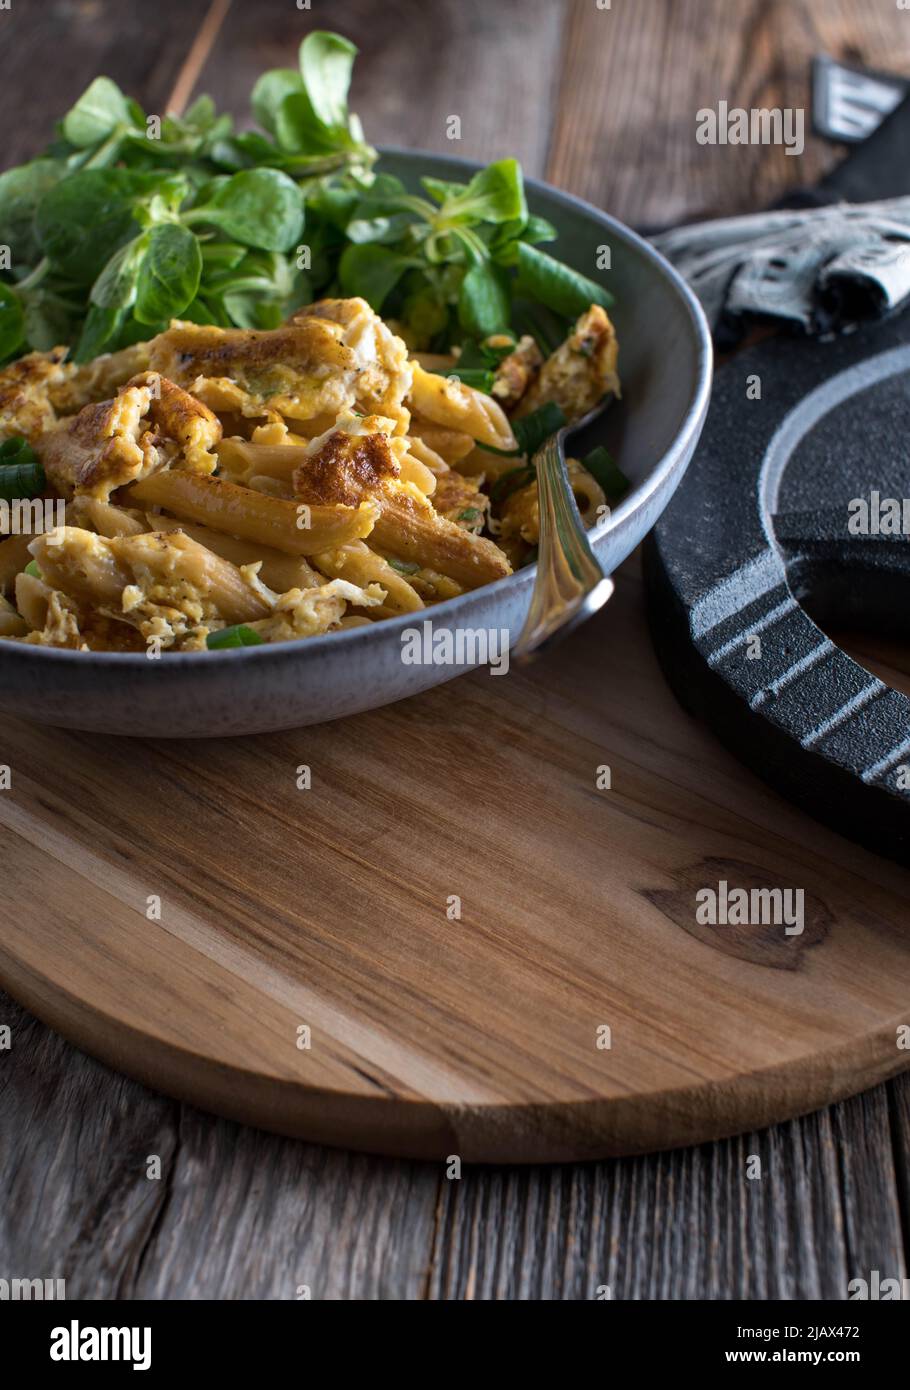 Workout meal for dinner or lunch with pan fried whole wheat pasta, scrambled eggs and green salad served on wooden table background with copy space Stock Photo